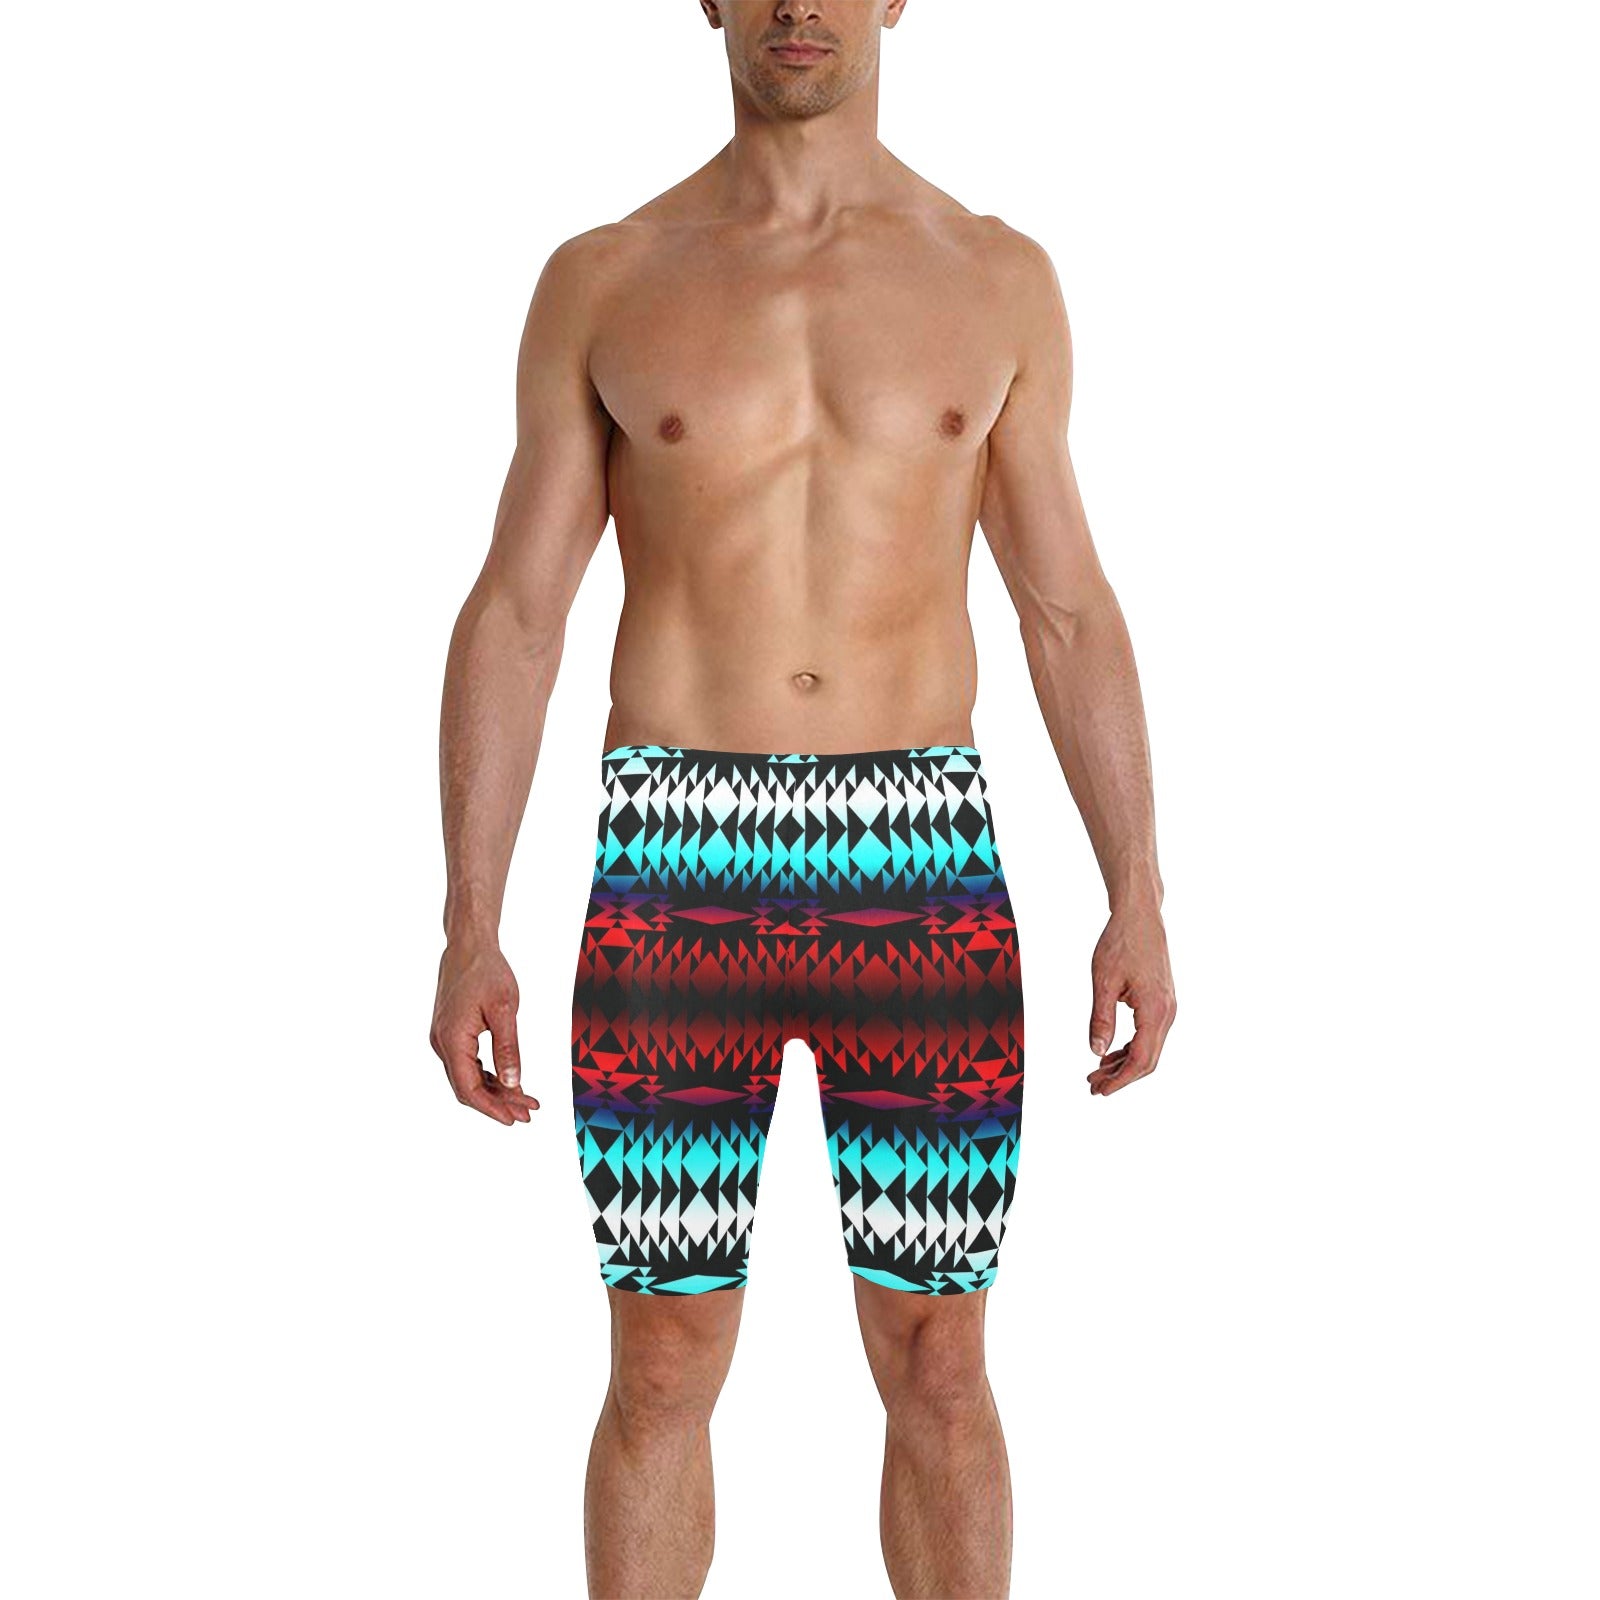 In Between Two Worlds Men's Knee Length Swimming Trunks